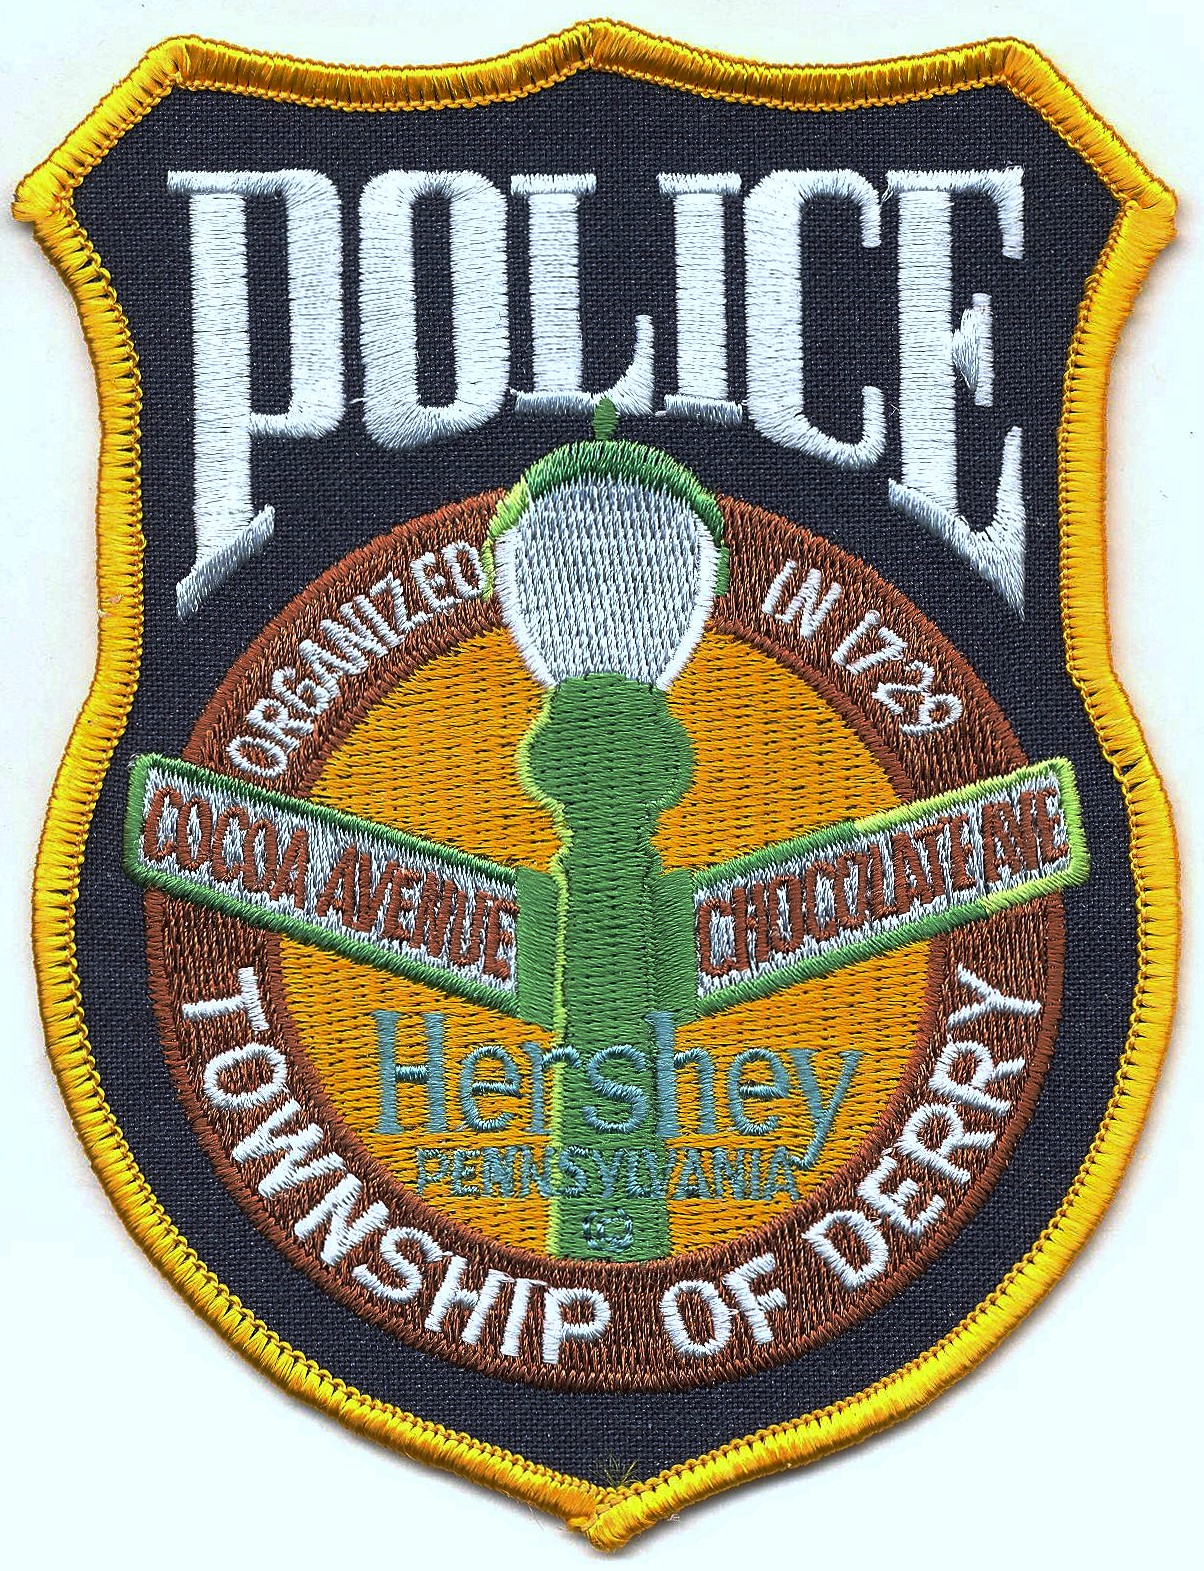 EAST TAYLOR TOWNSHIP PENNSYLVANIA PA POLICE PATCH